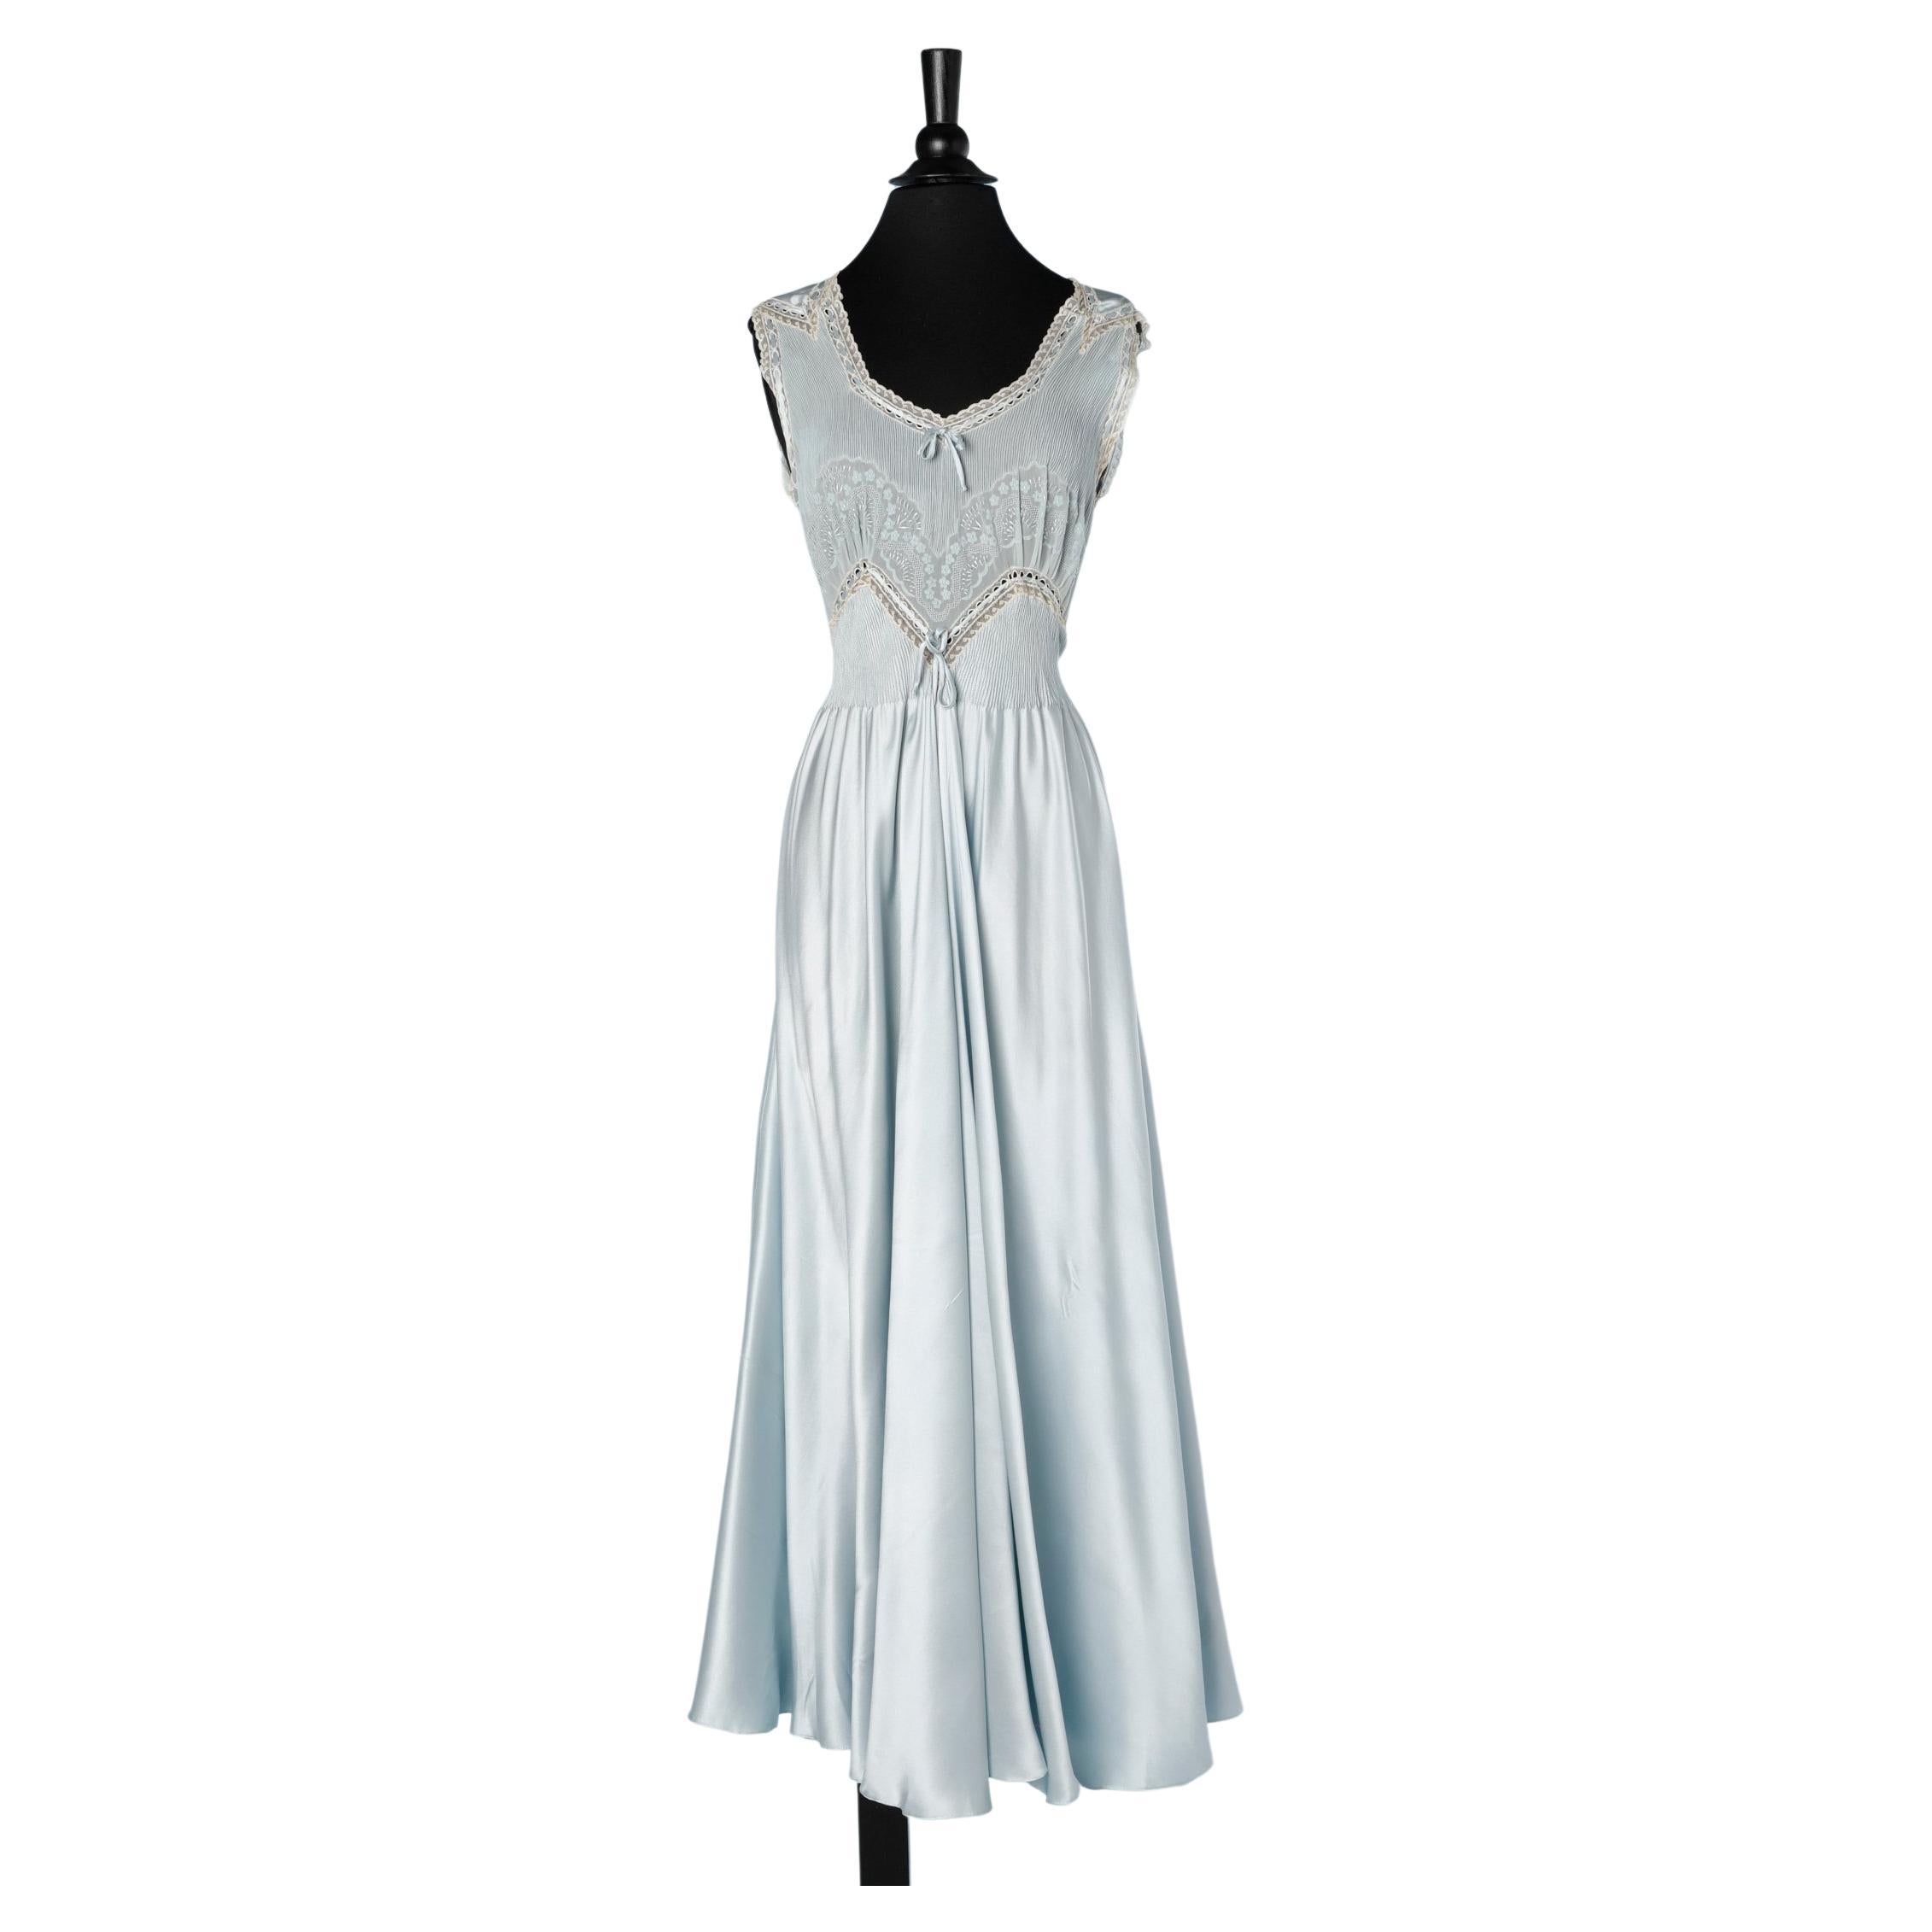 Pale blue silk , lace and embroideries Sleeping gown Circa 1930